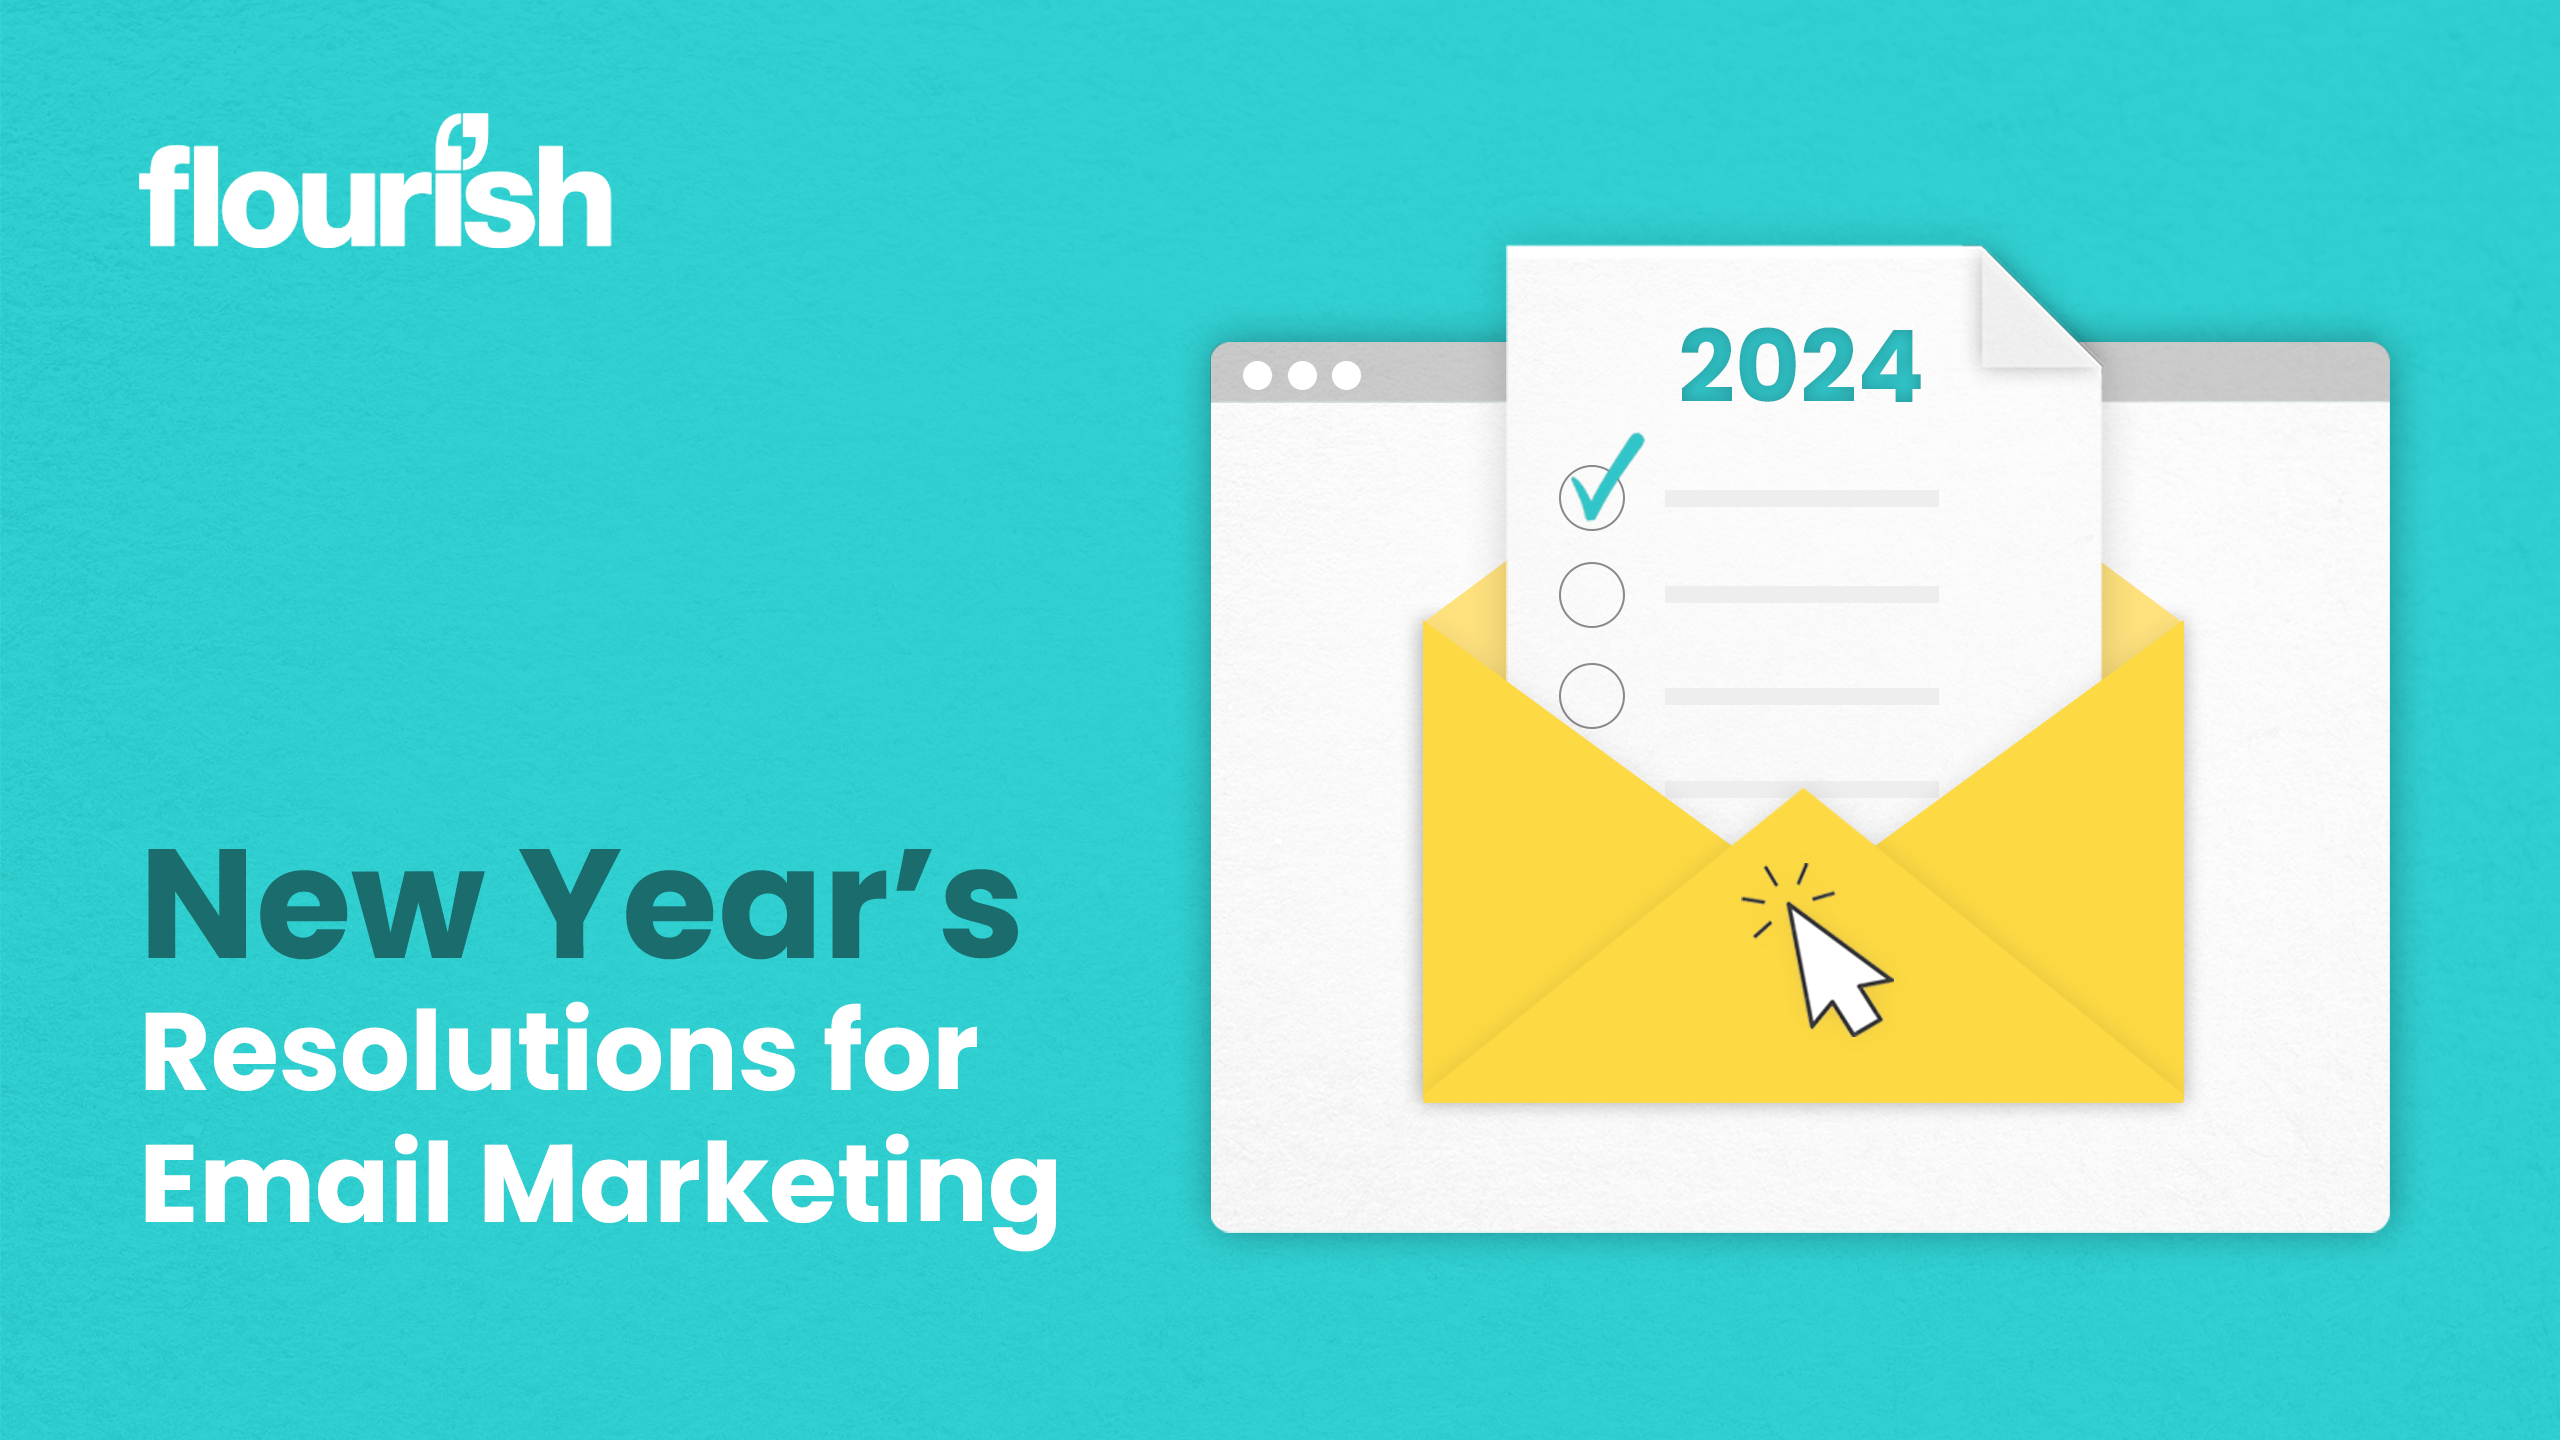 New Year's resolutions for email marketing